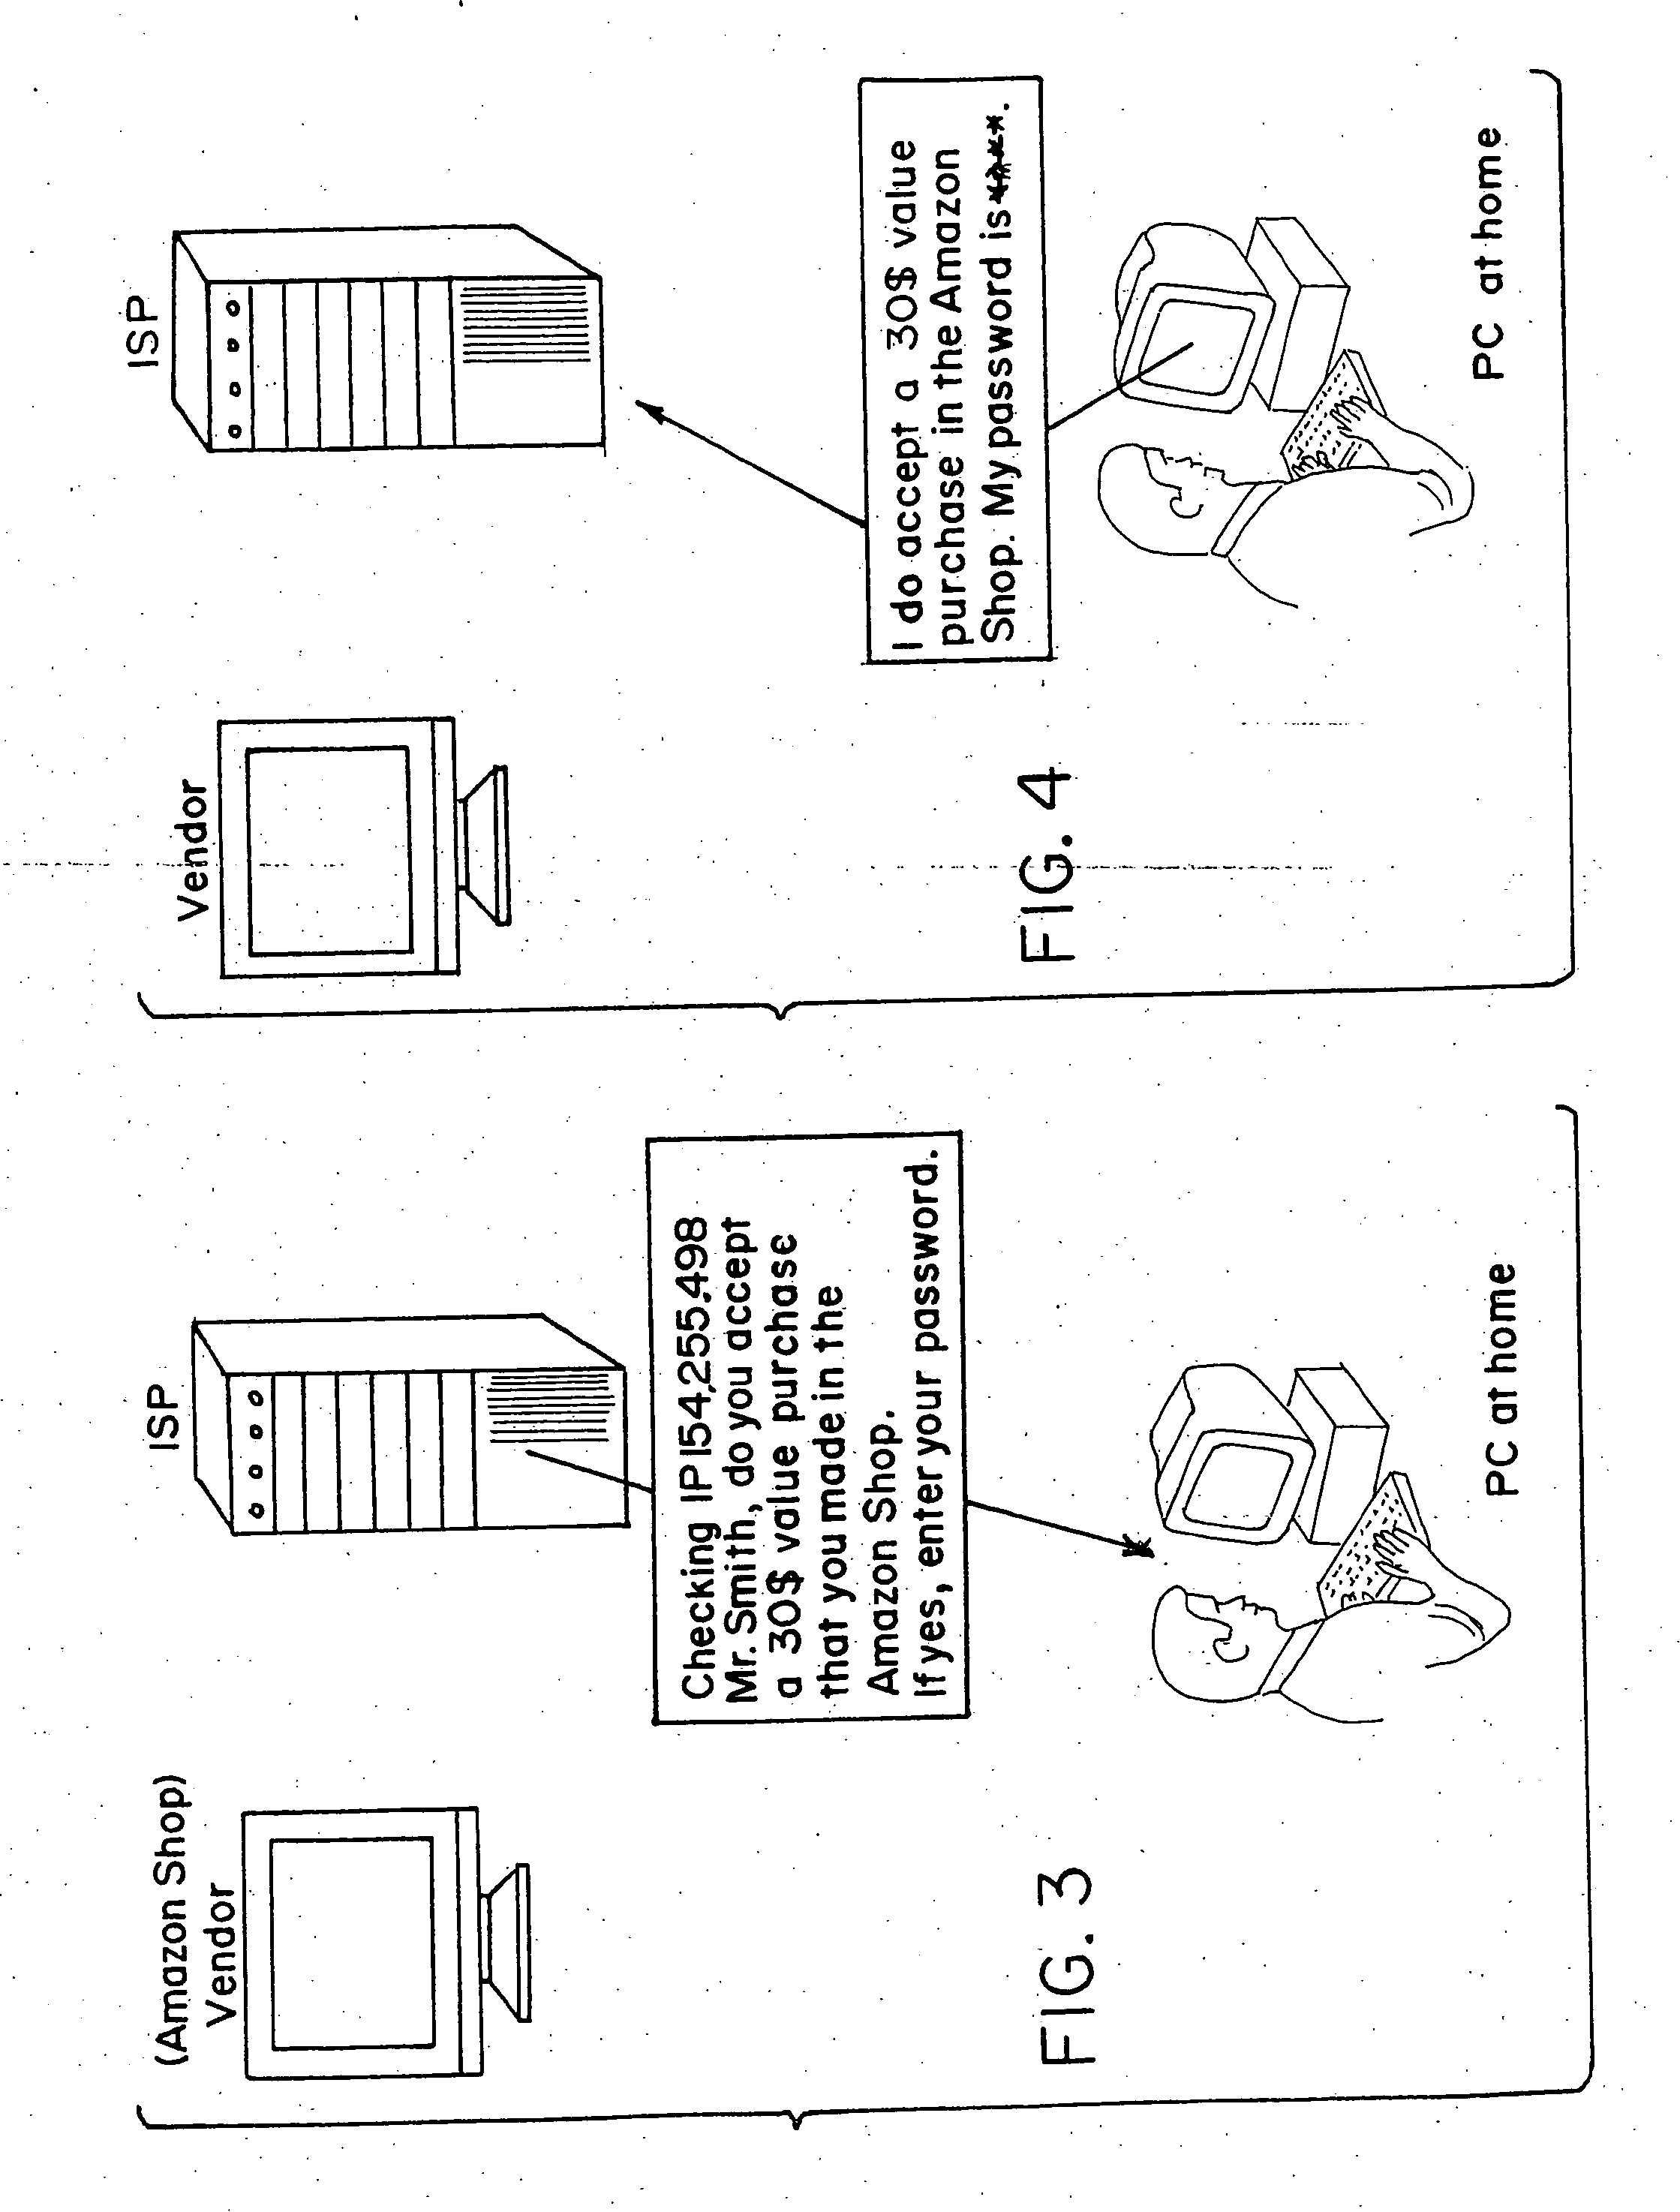 System and method for secure network purchasing